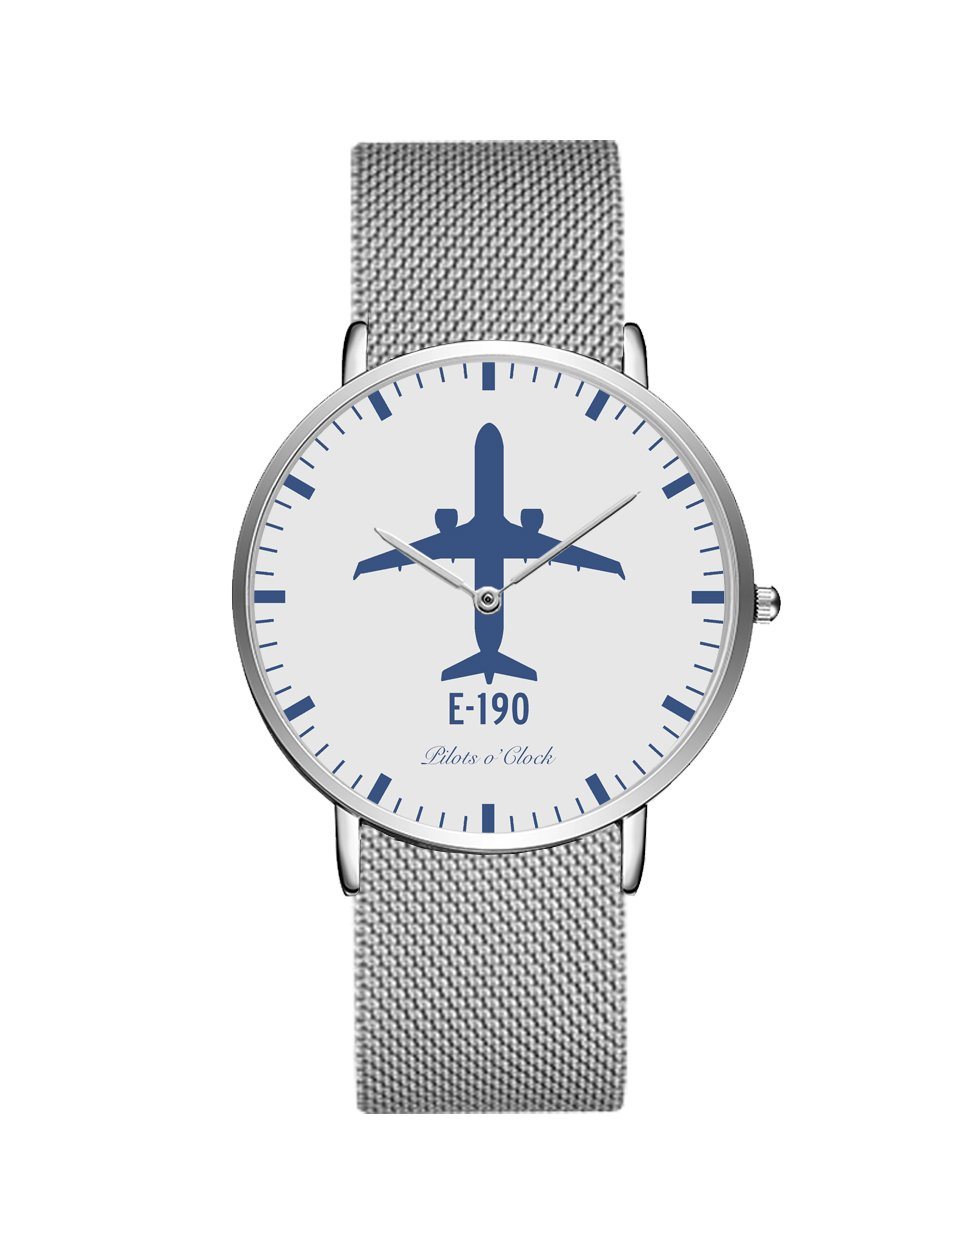 Embraer E190 Stainless Steel Strap Watches Pilot Eyes Store Silver & Silver Stainless Steel Strap 